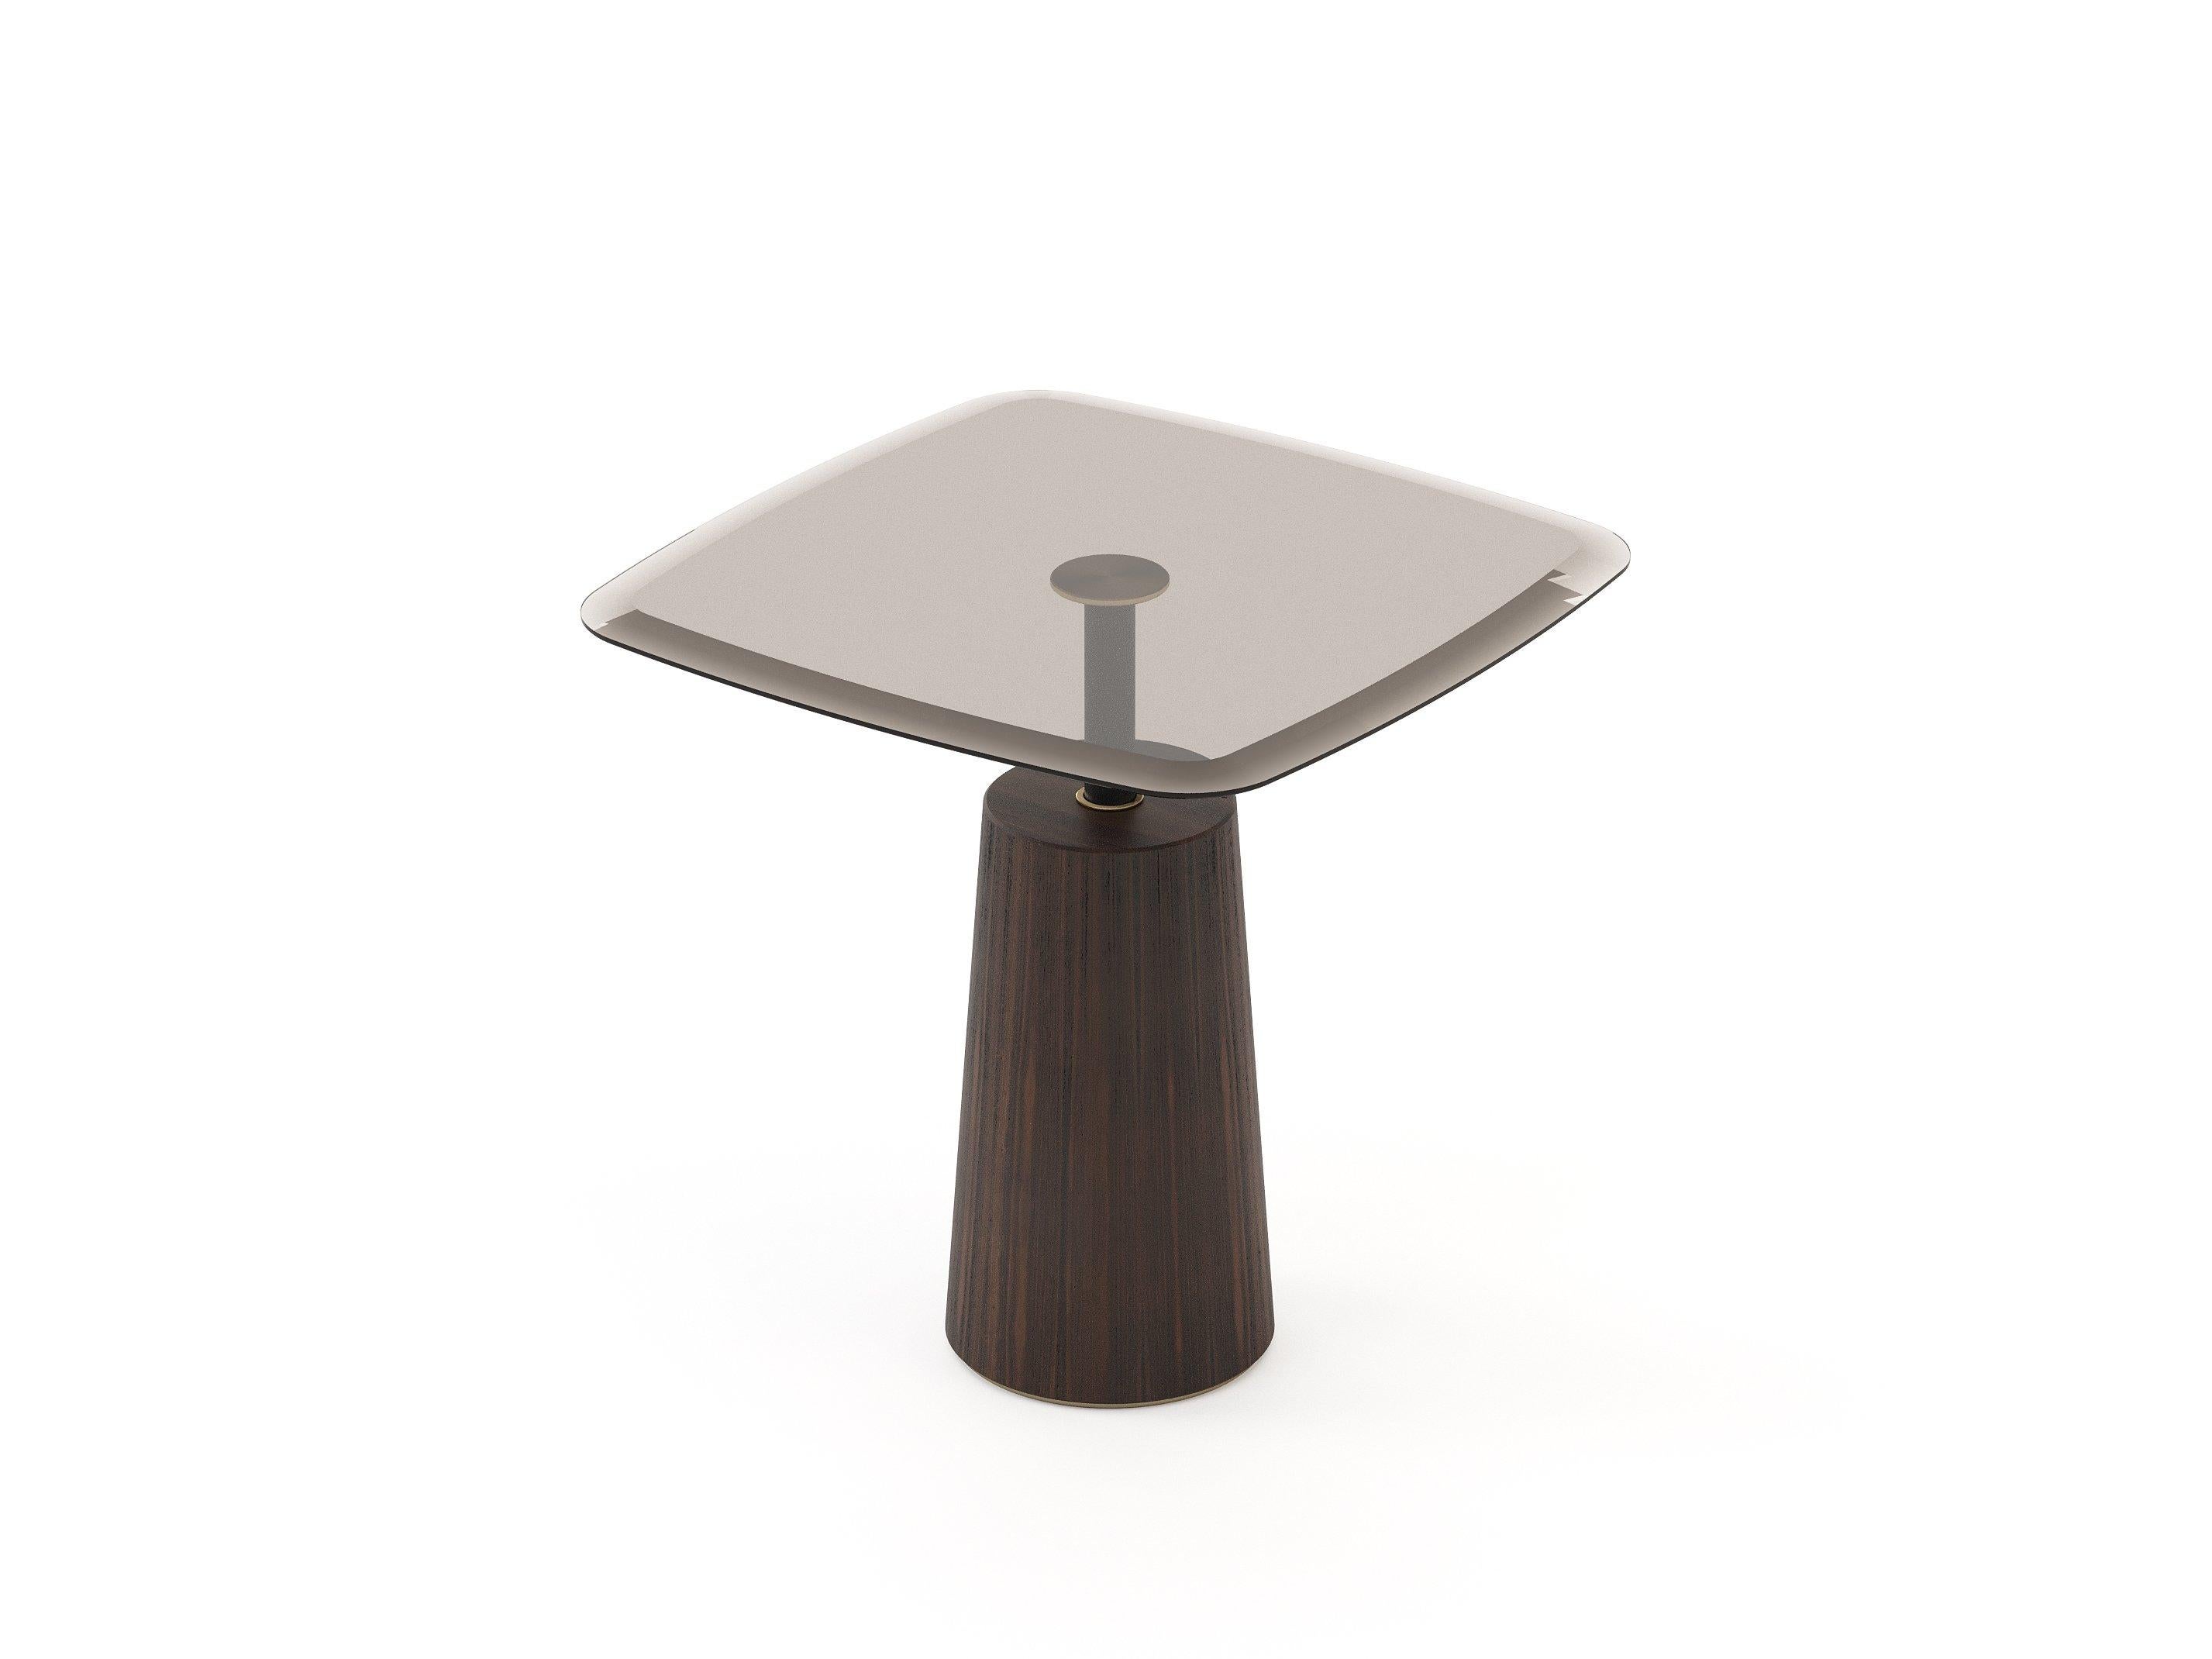 Handcrafted of Eucalyptus Fumé Matte base holding bronze glass top.
Detailing in black texturized & gold stainless steel
Low table dimensions: 43.5